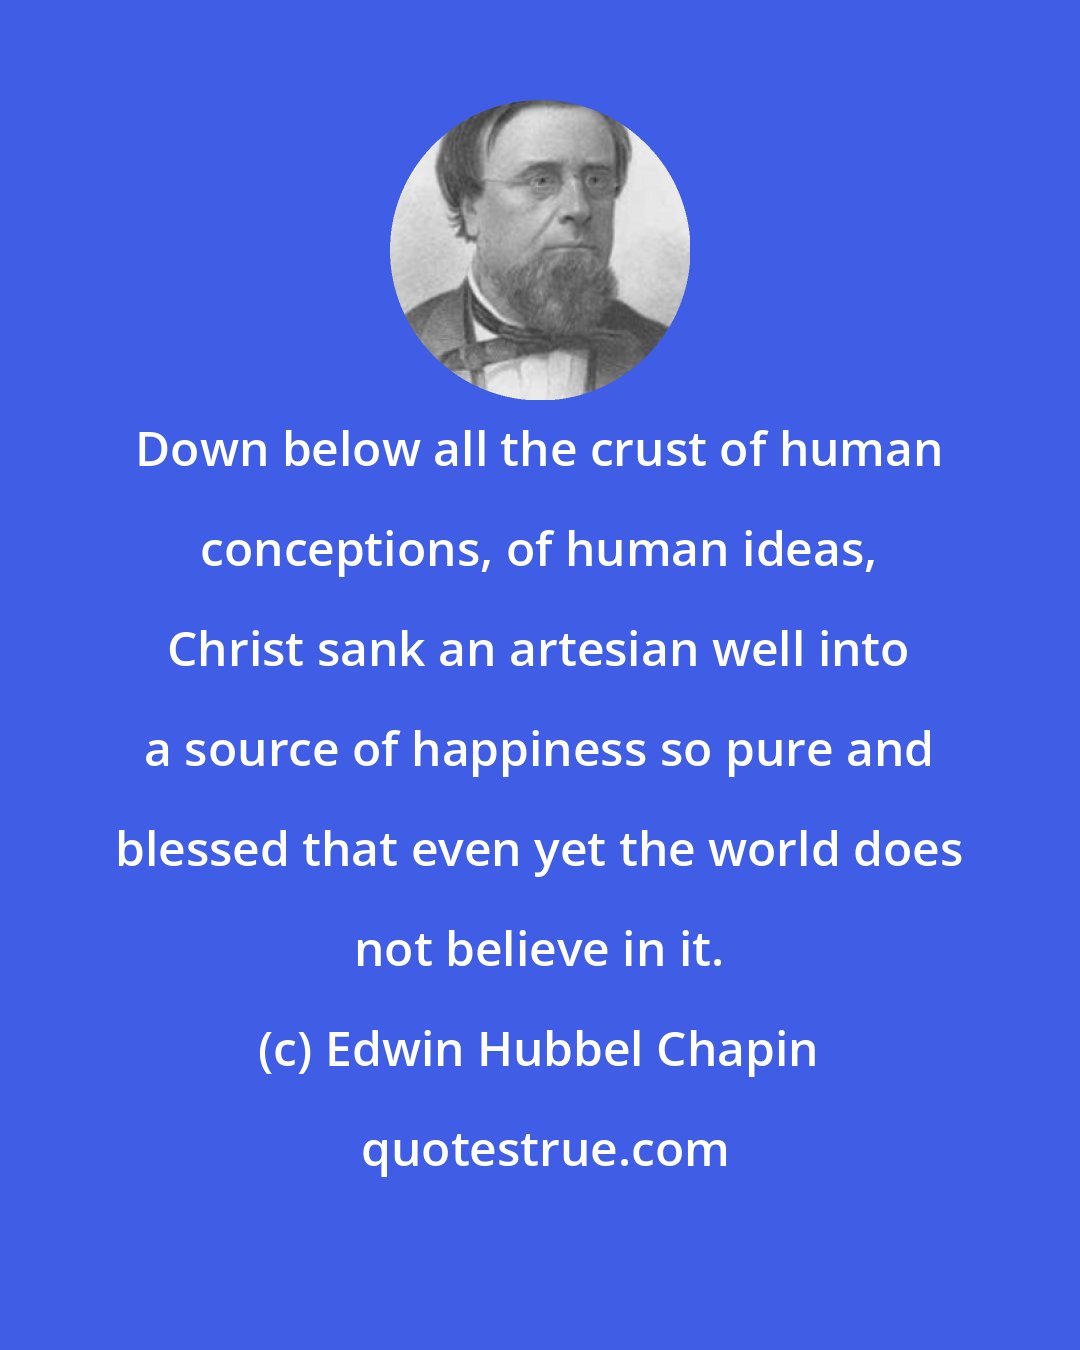 Edwin Hubbel Chapin: Down below all the crust of human conceptions, of human ideas, Christ sank an artesian well into a source of happiness so pure and blessed that even yet the world does not believe in it.